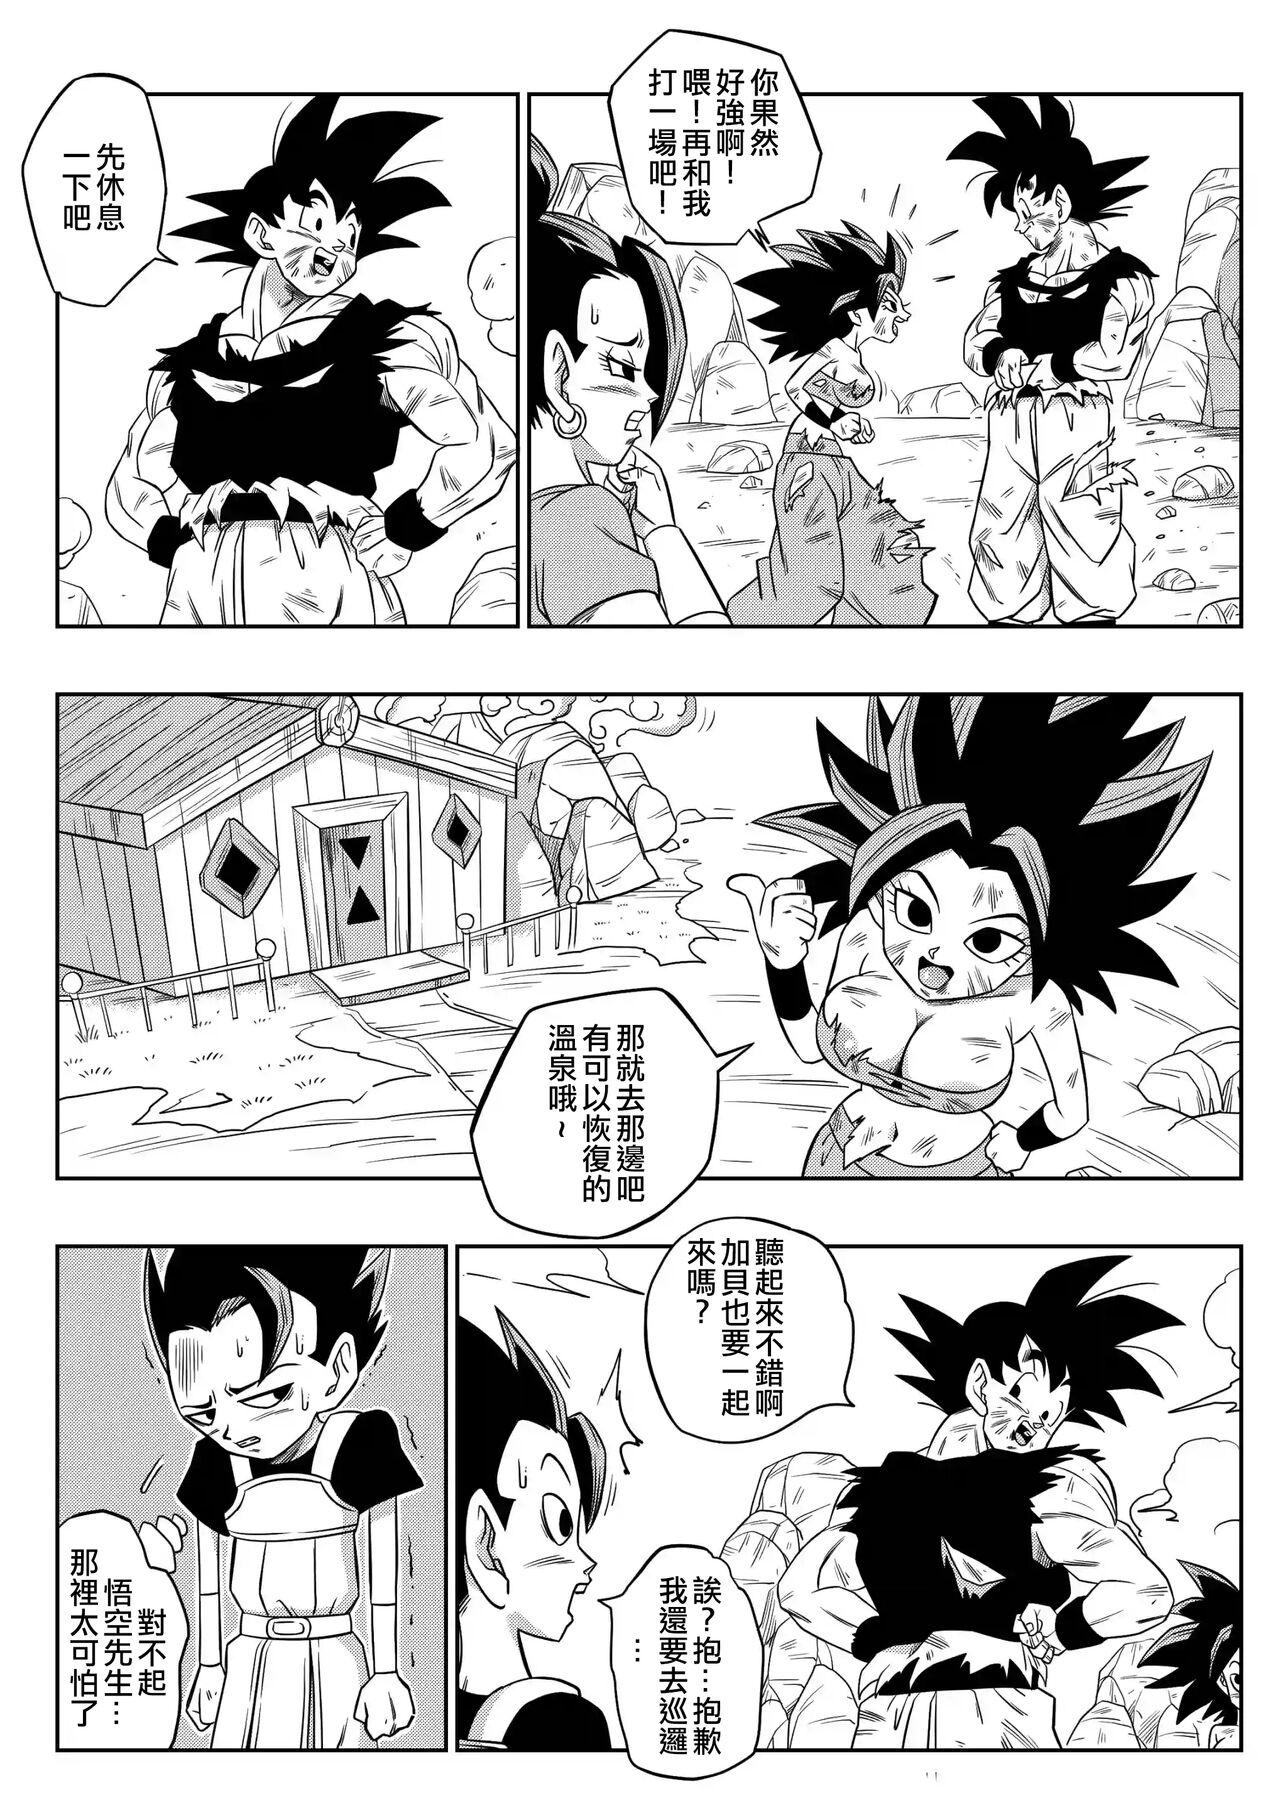 Mms Fight in the 6th Universe!!! - Dragon ball super Imvu - Page 6